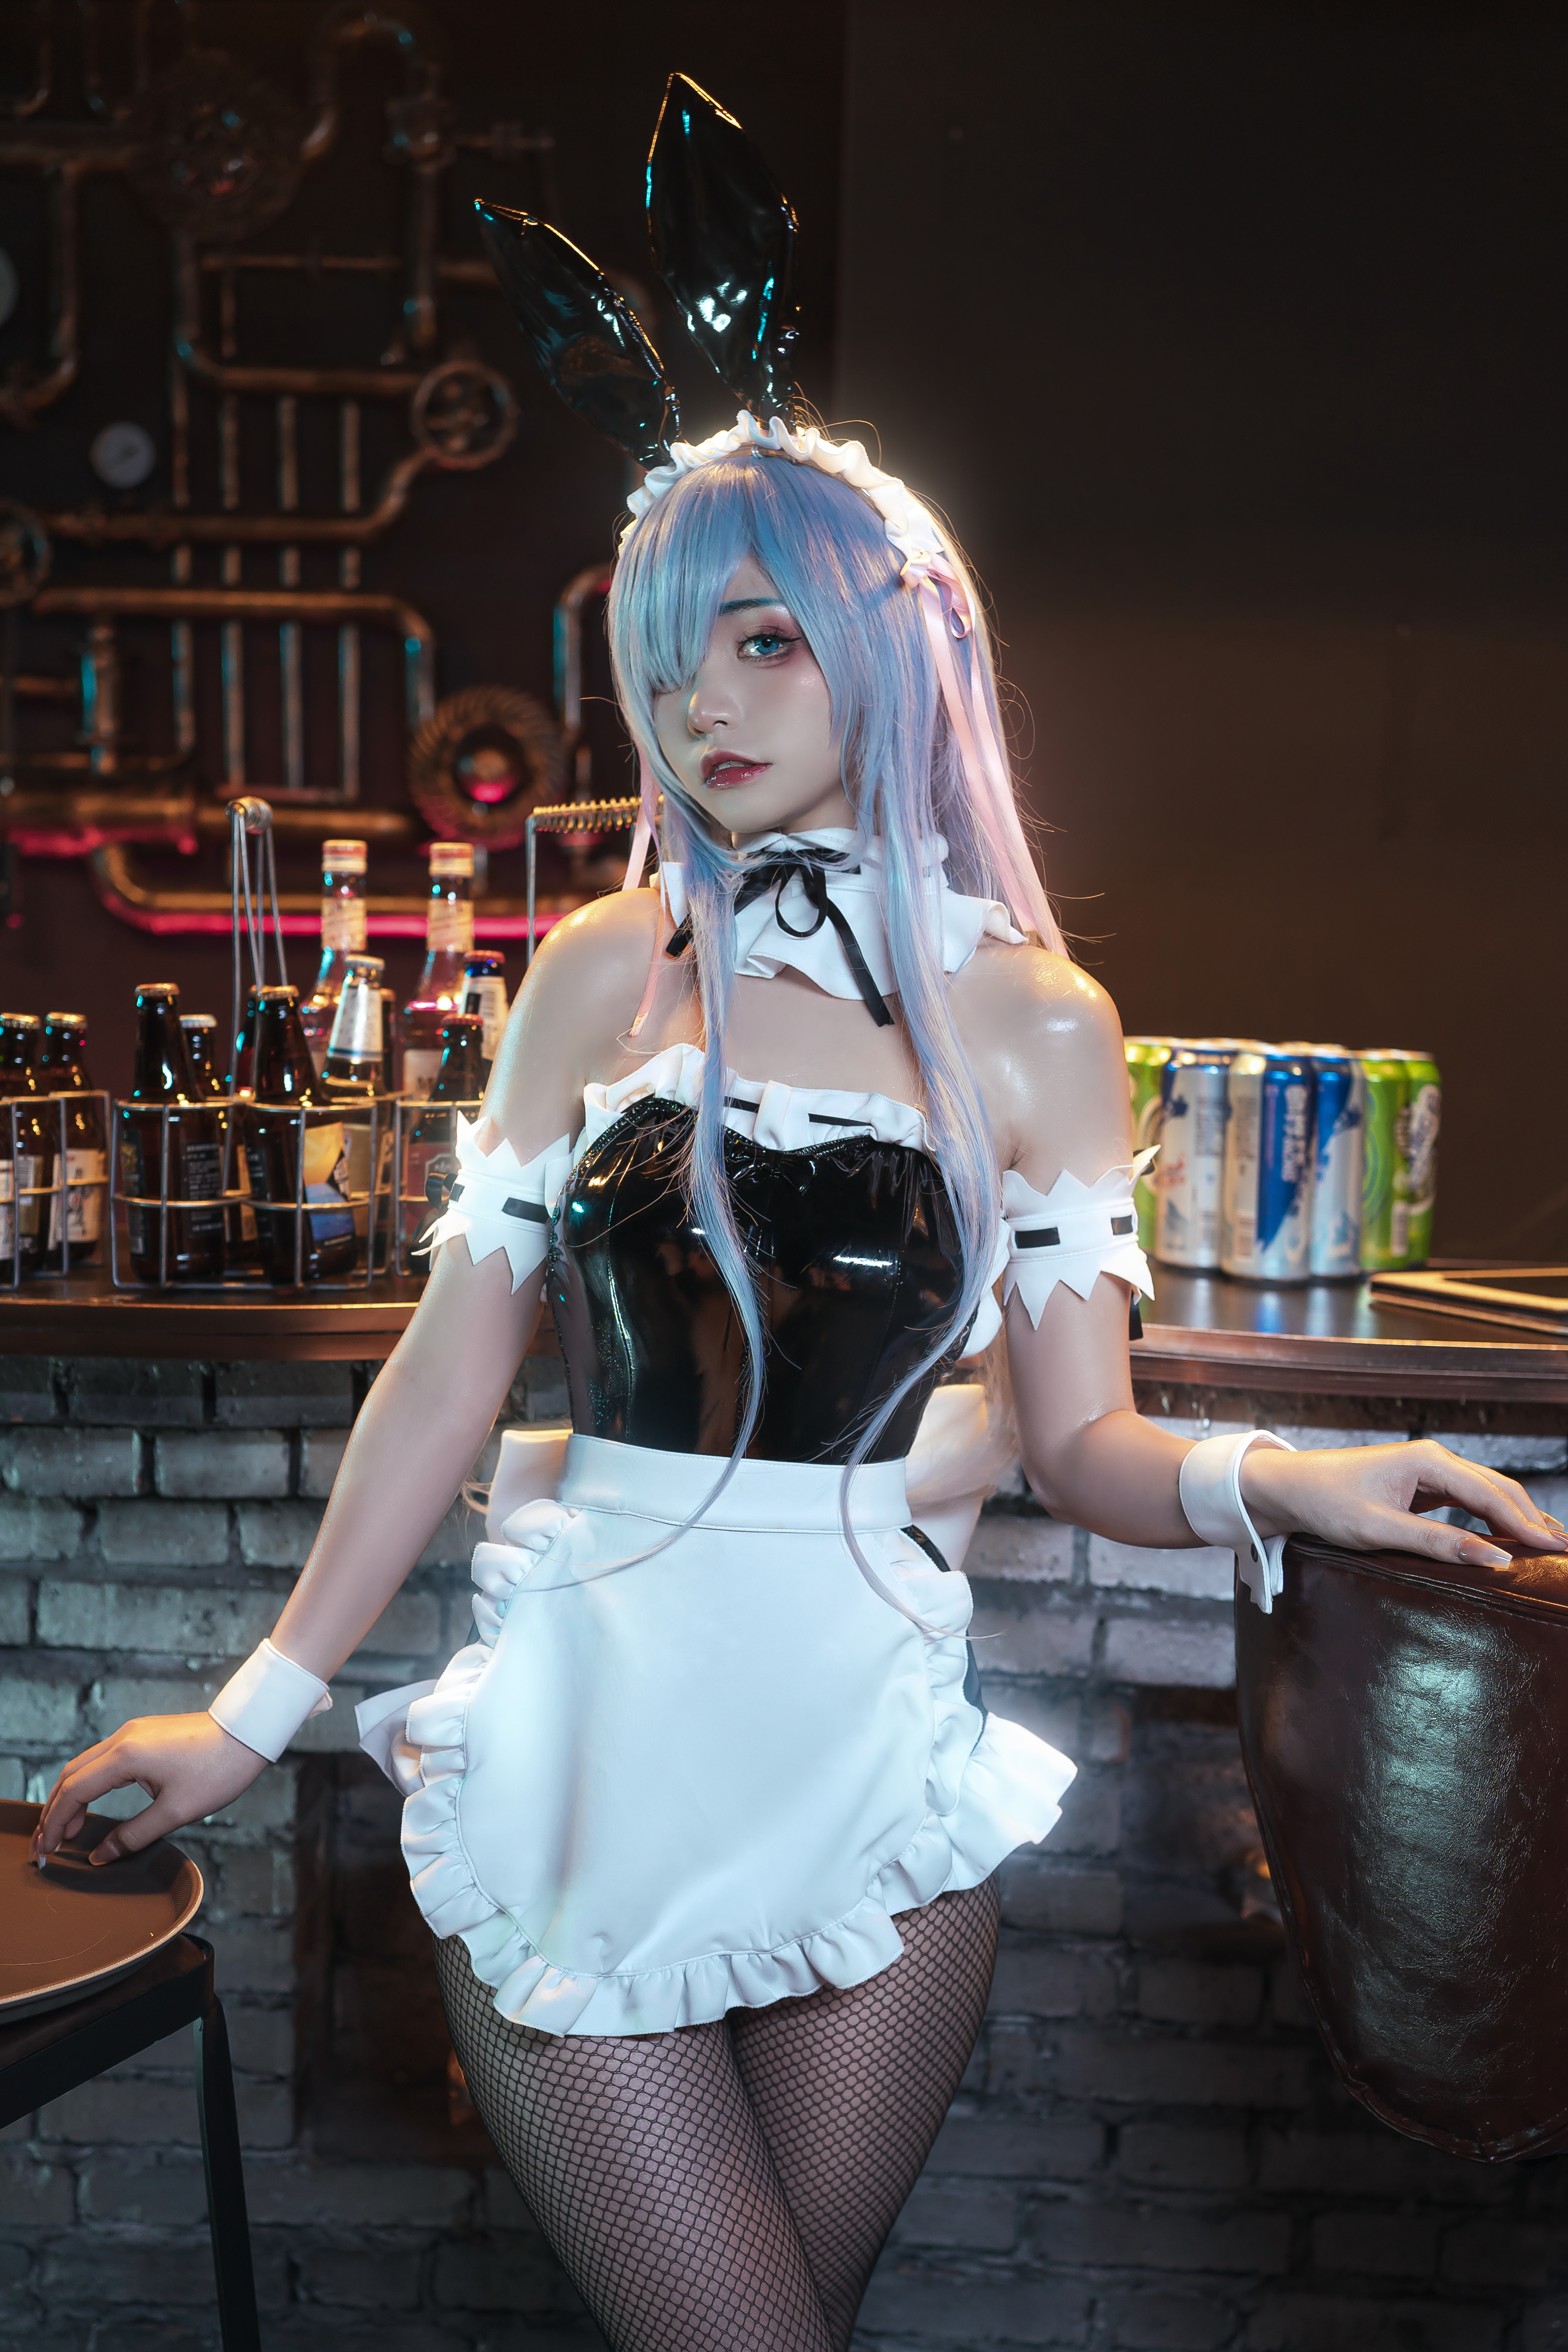 Asian Women Maid Outfit Bunny Ears Cosplay 3414x5120